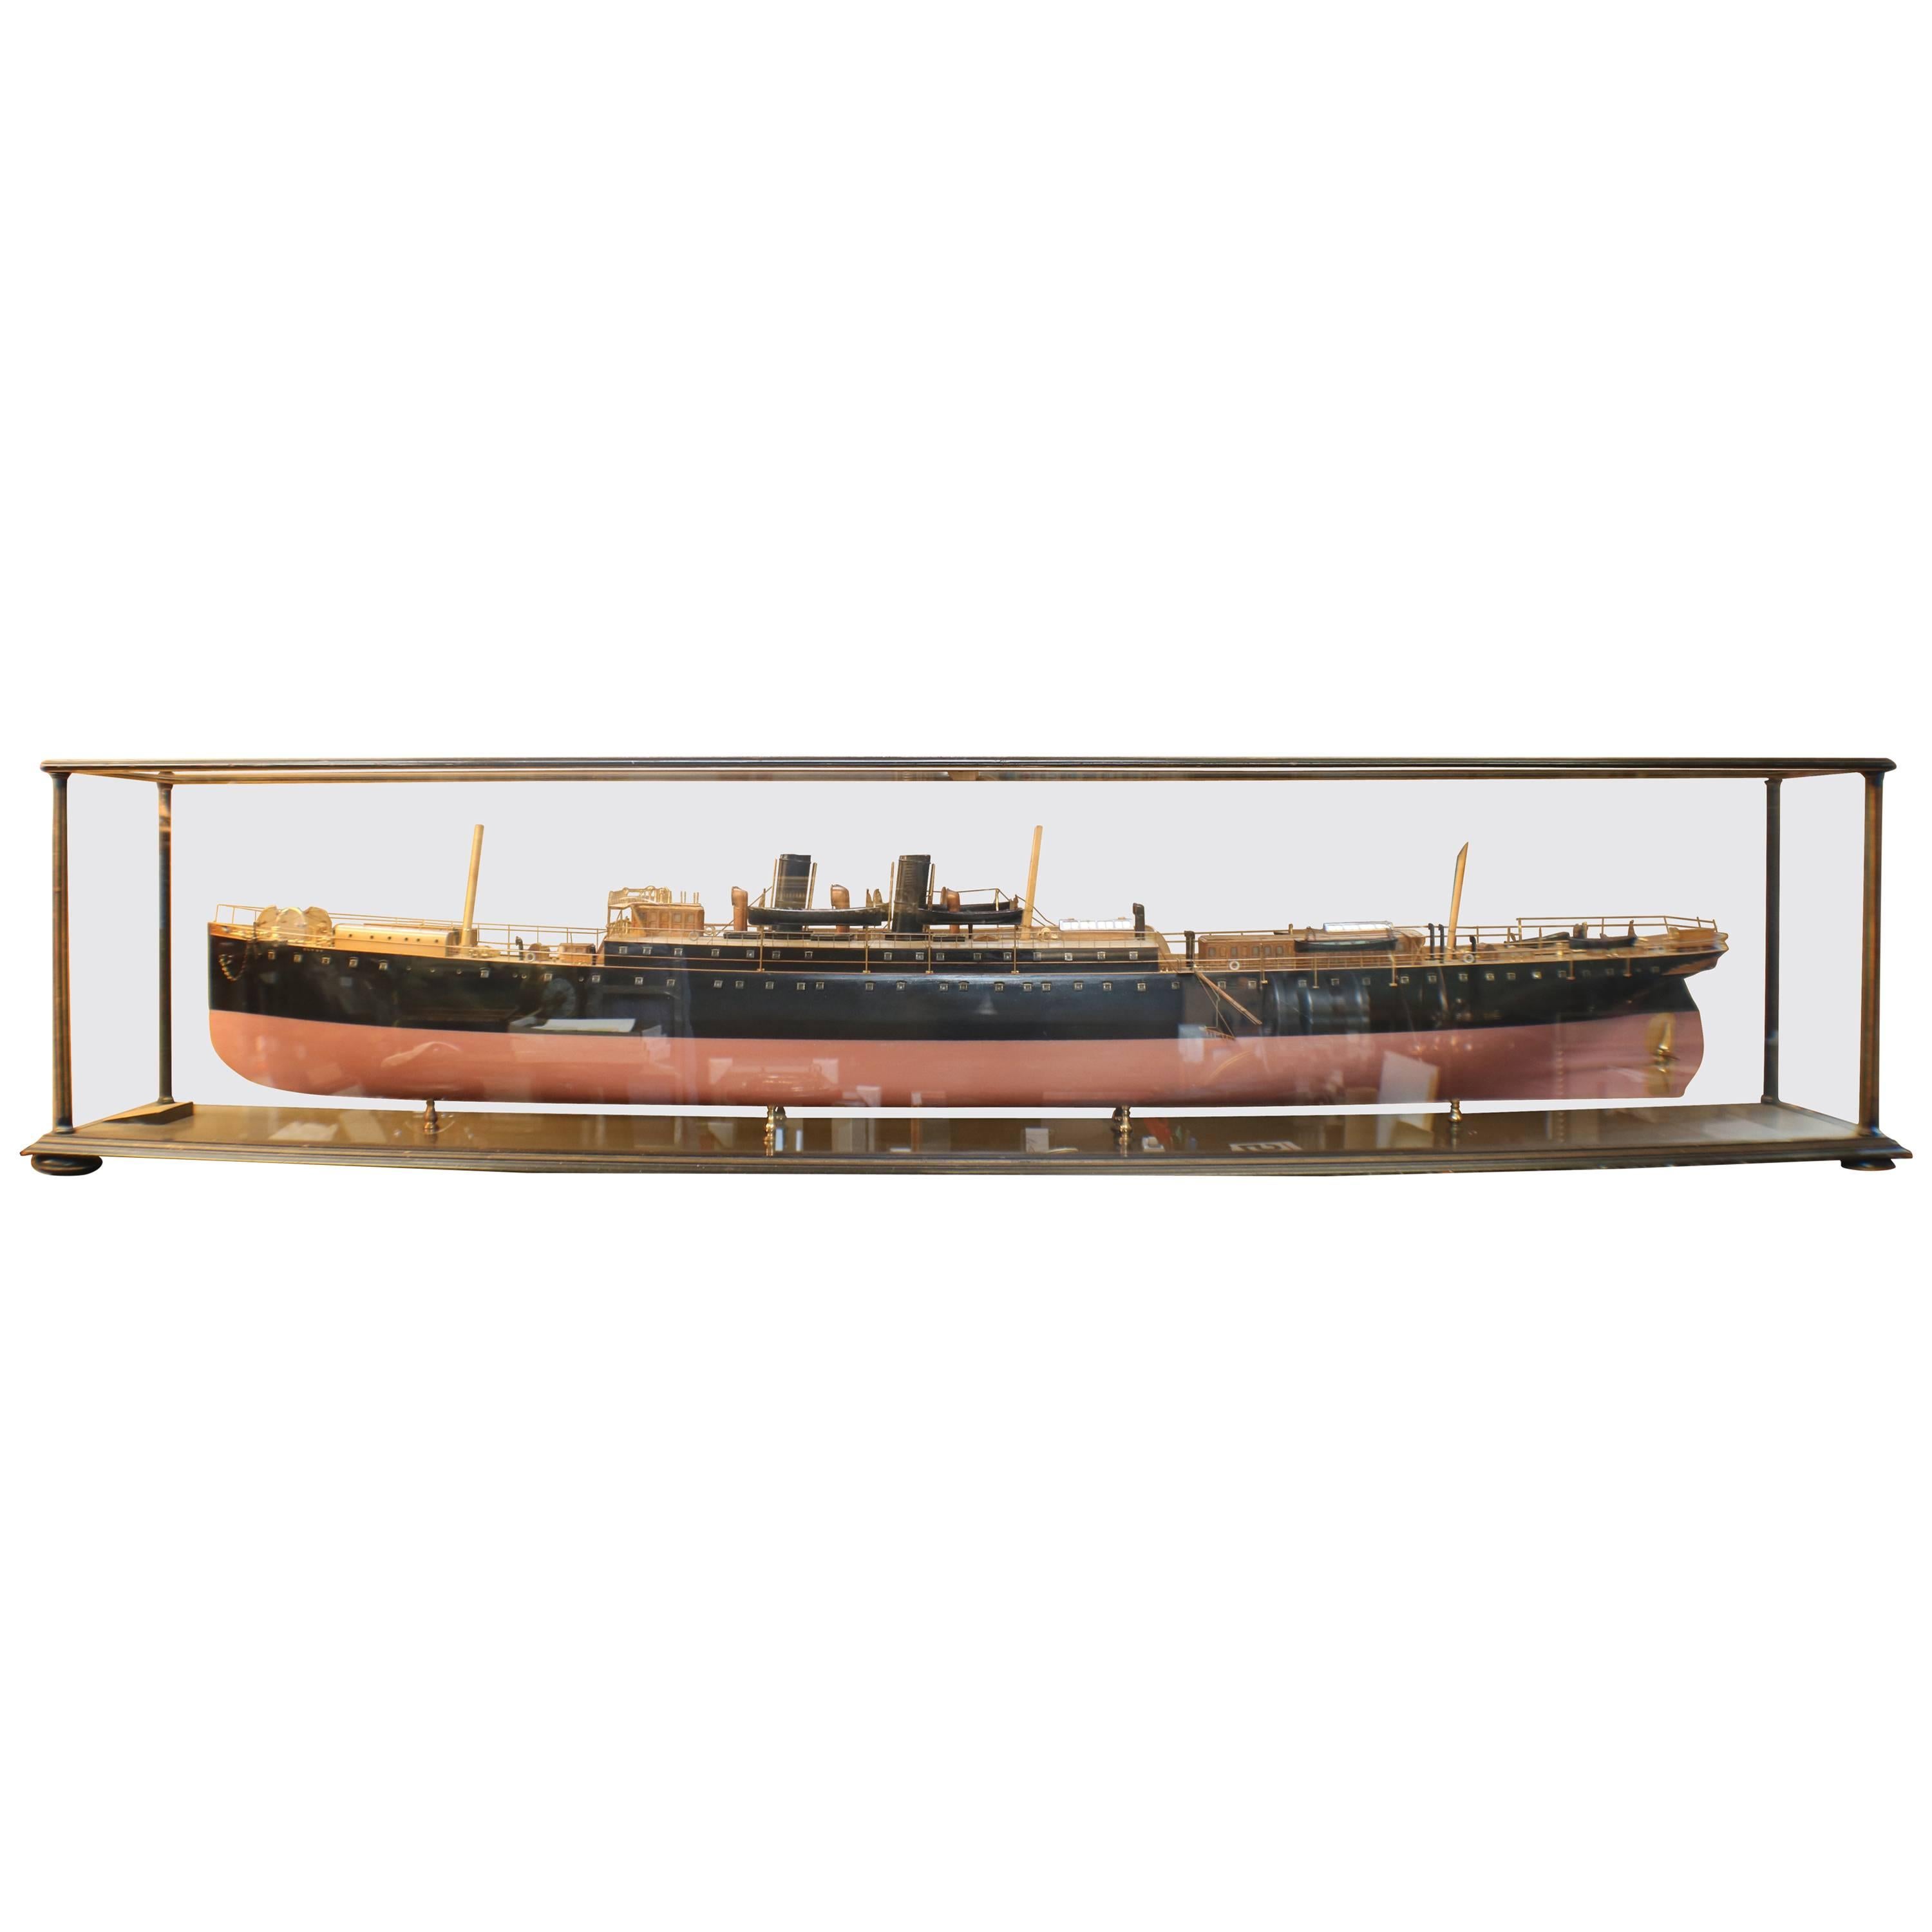 Builder's Model of the P&O Steamship "Clyde"